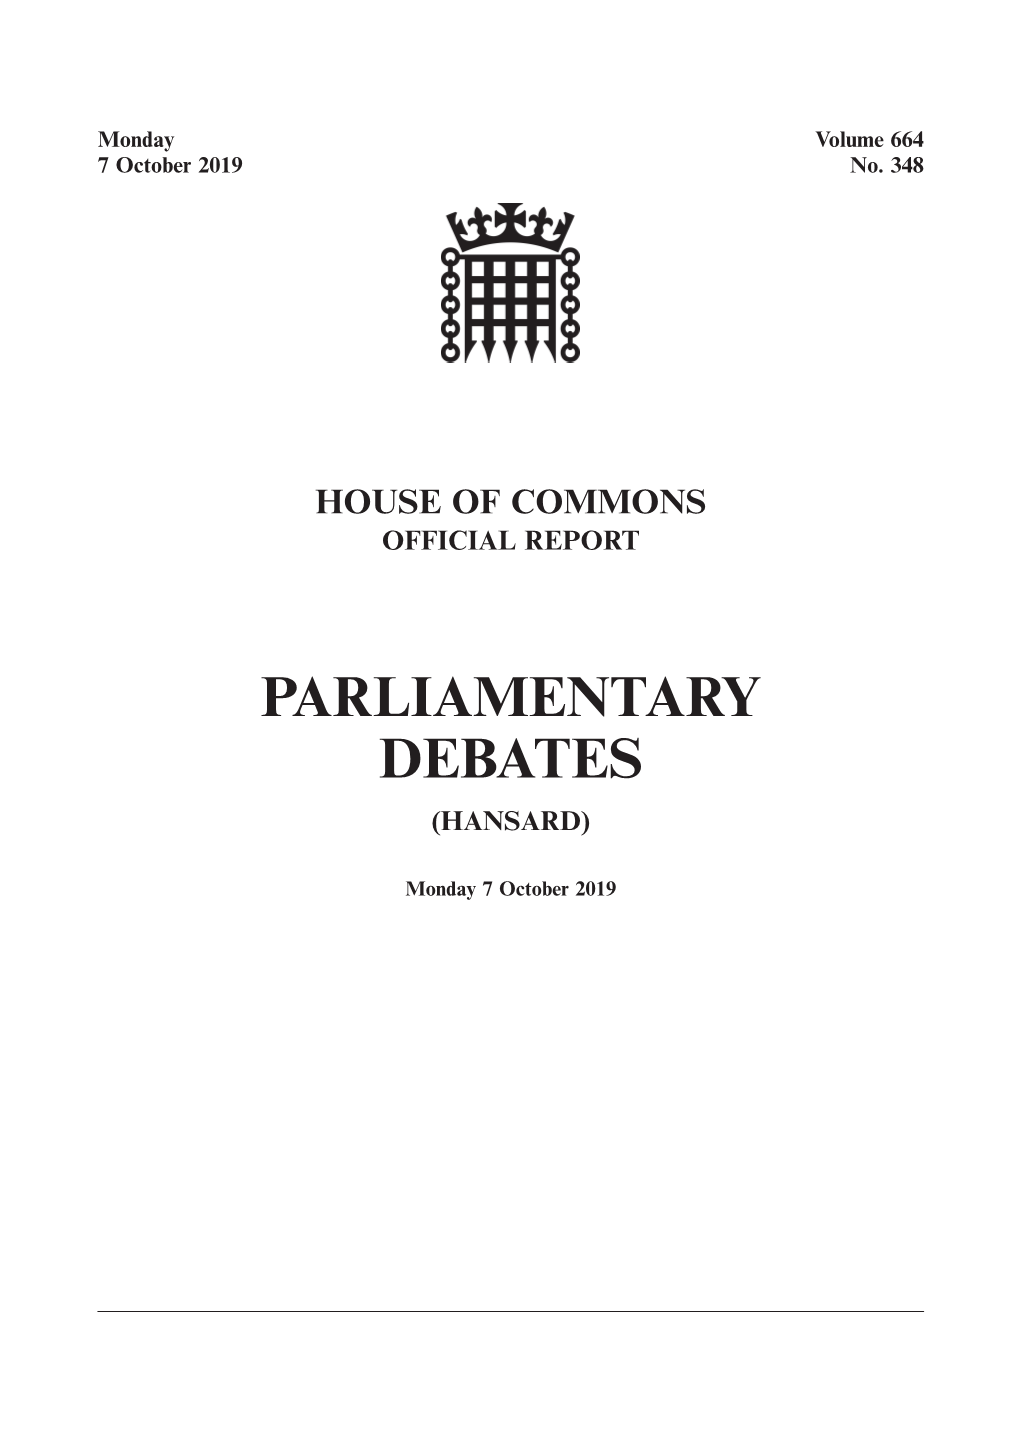 House of Commons Official Report